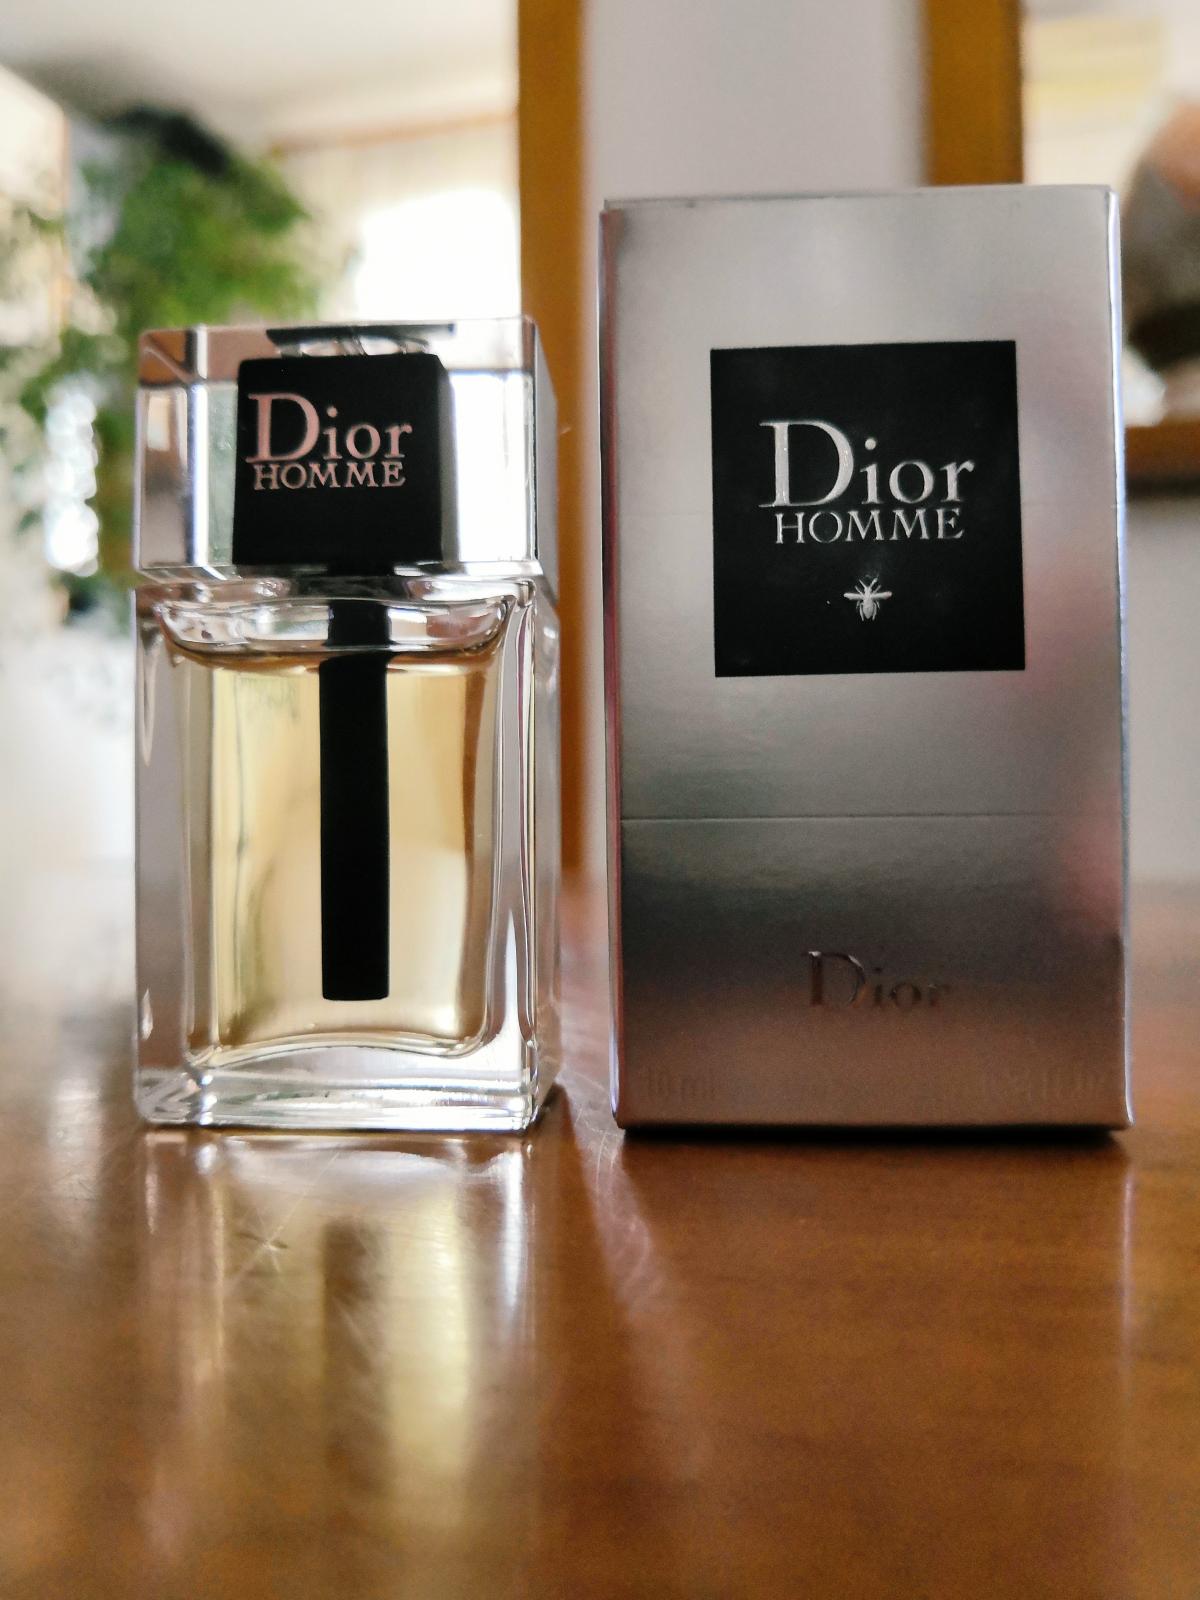 Homme 2020. Christian Dior homme (2020). Dior homme 2020. Диор хом 2020. Dior one 2020 Парфюм.